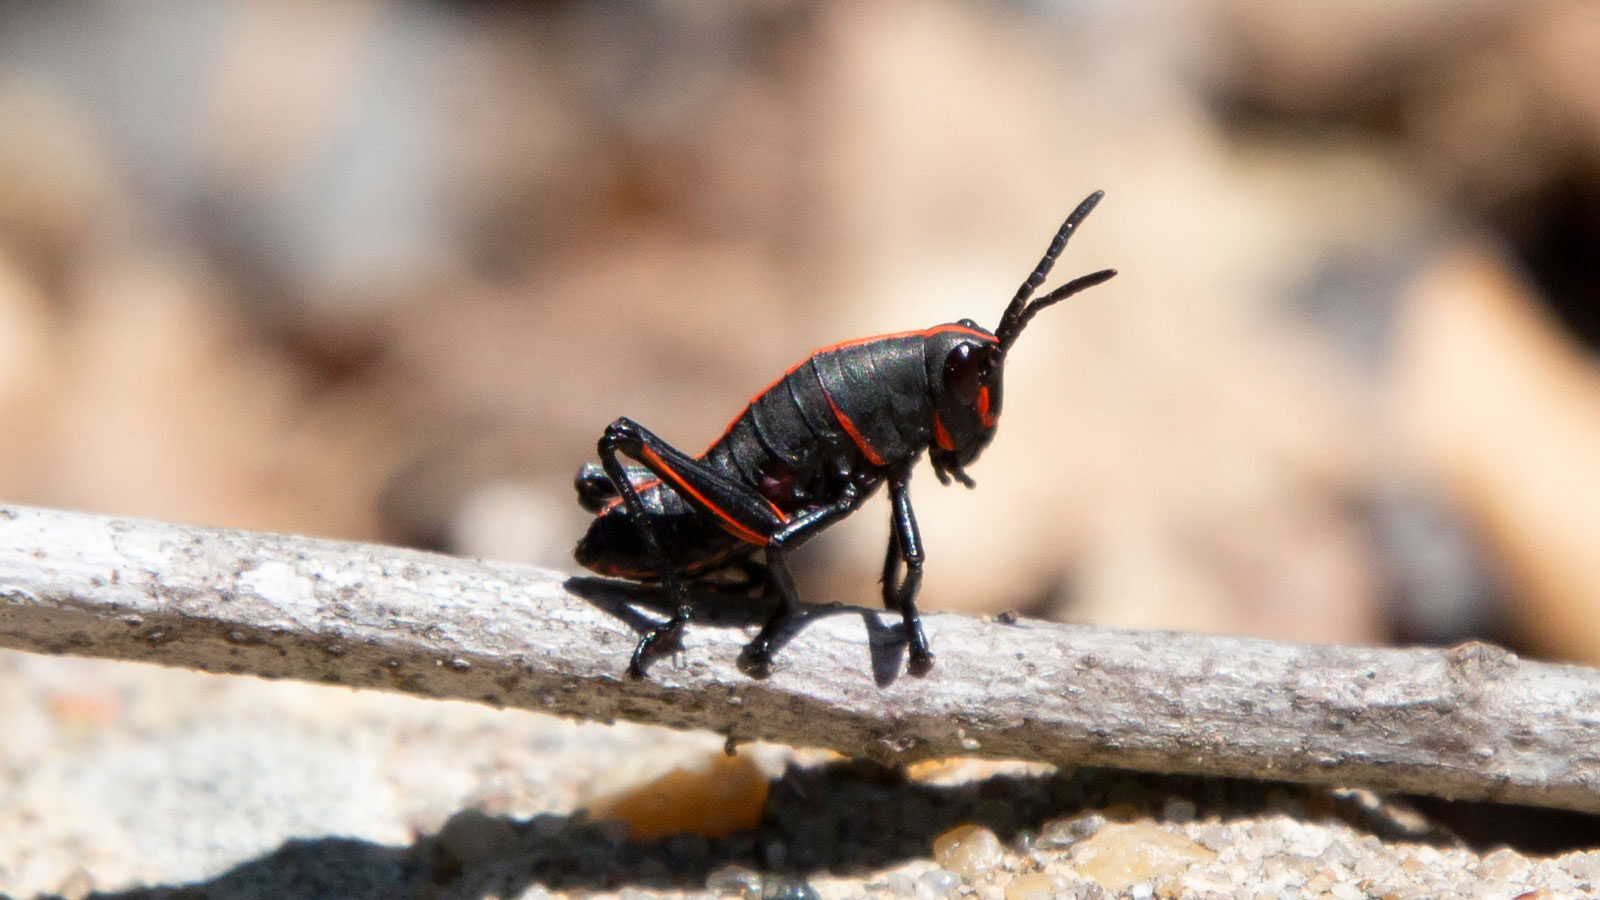 Eastern lubber grasshopper nymph on a dried tree twig on cement